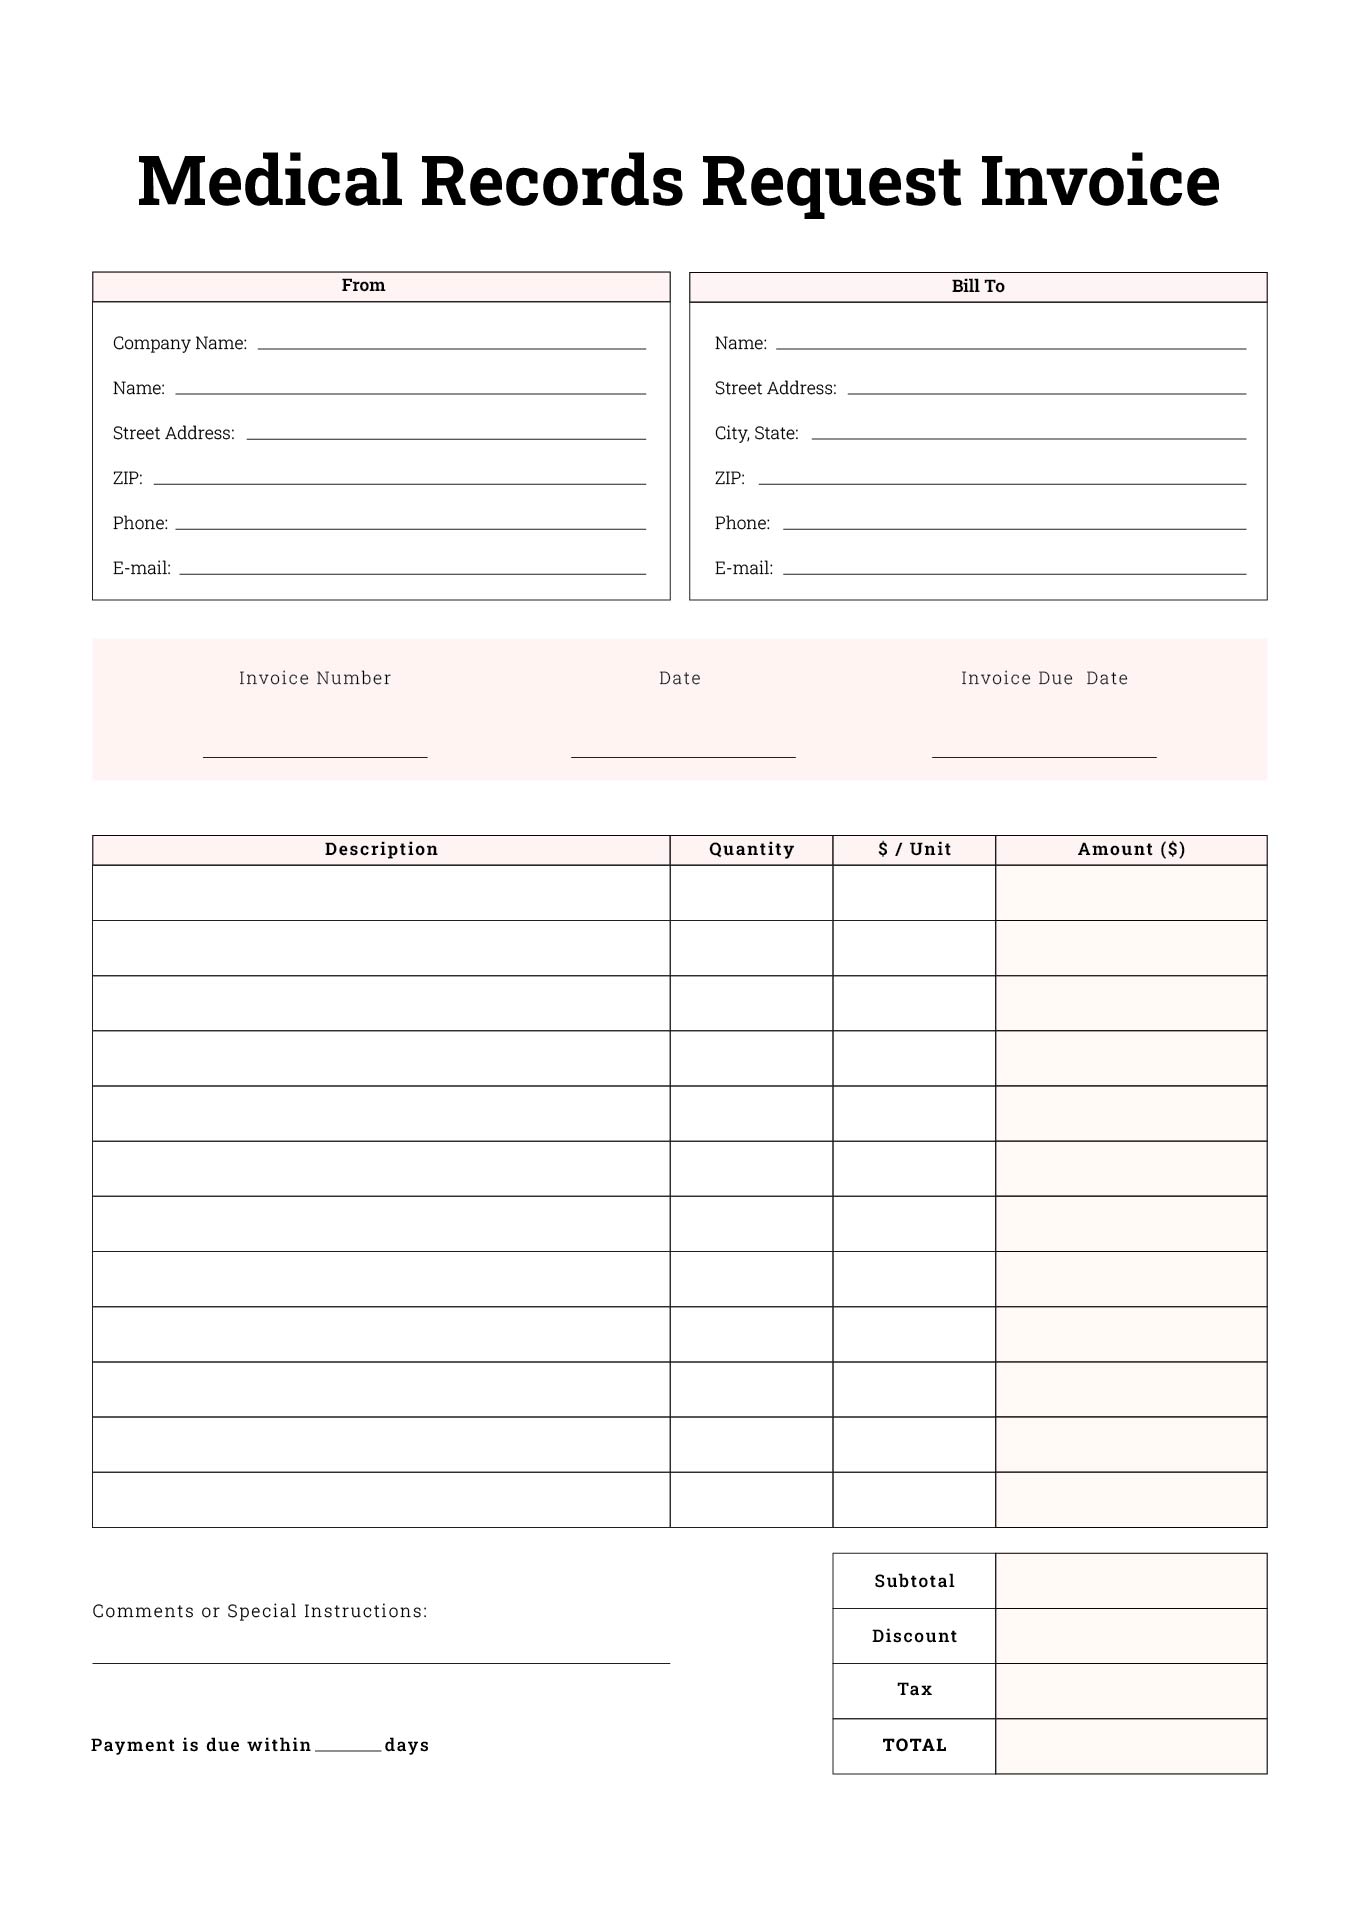 Printable Medical Records Request Invoice Template